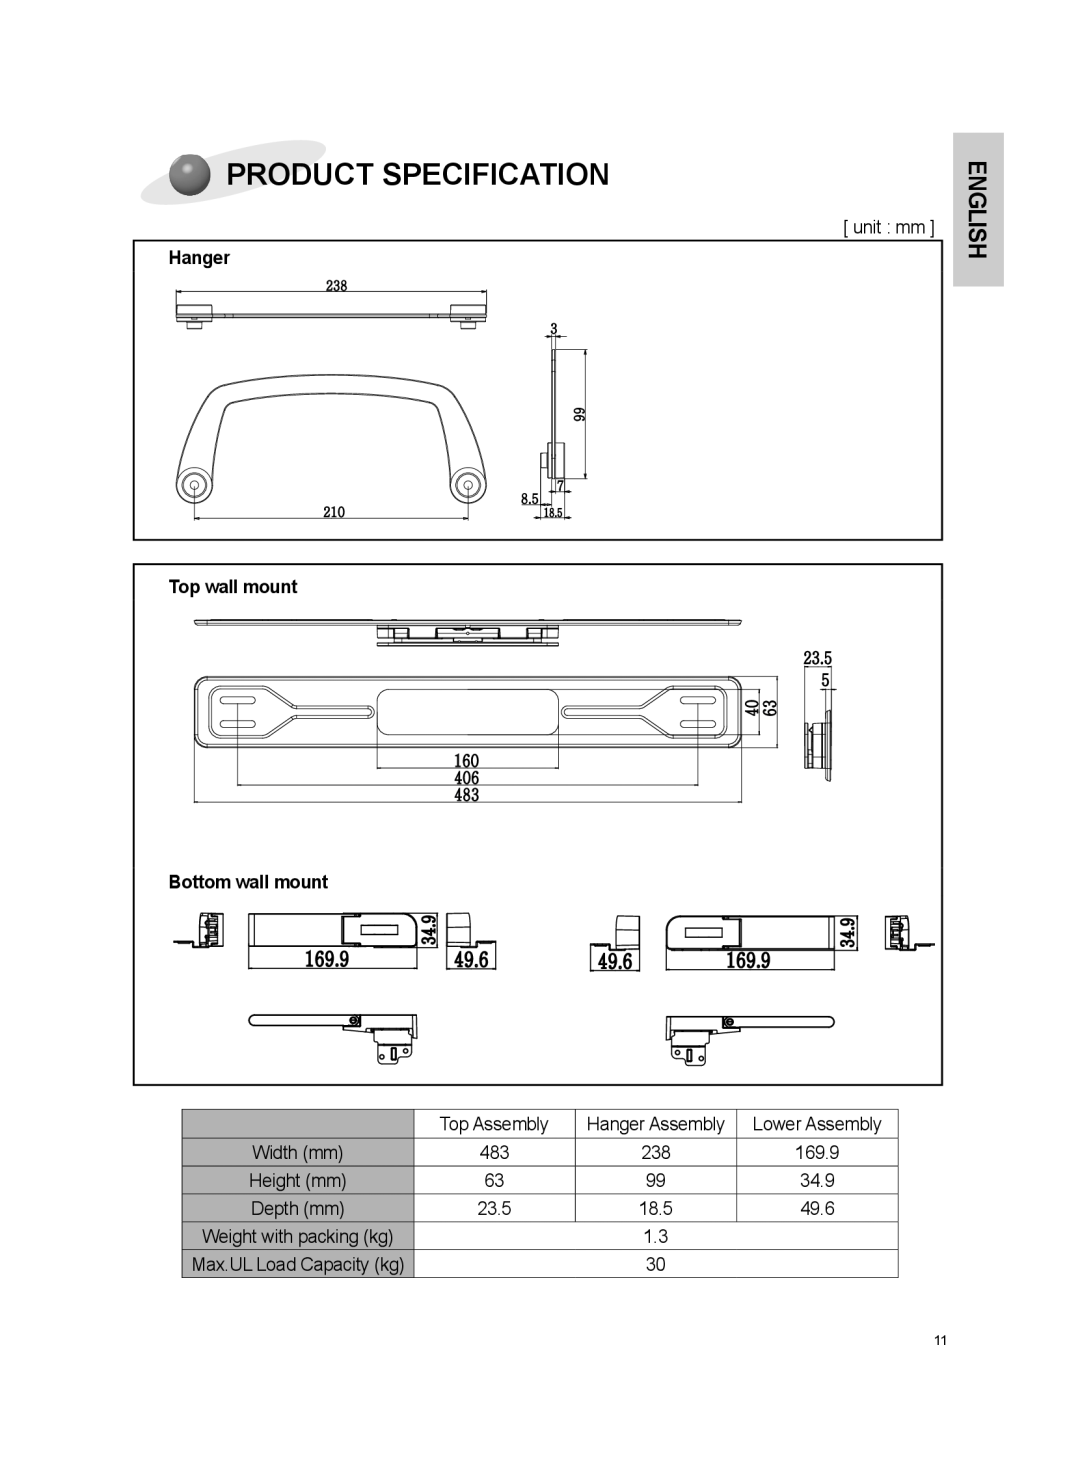 LG Electronics OSW100 install manual Product Specification, English, Hanger, Top wall mount, Bottom wall mount 